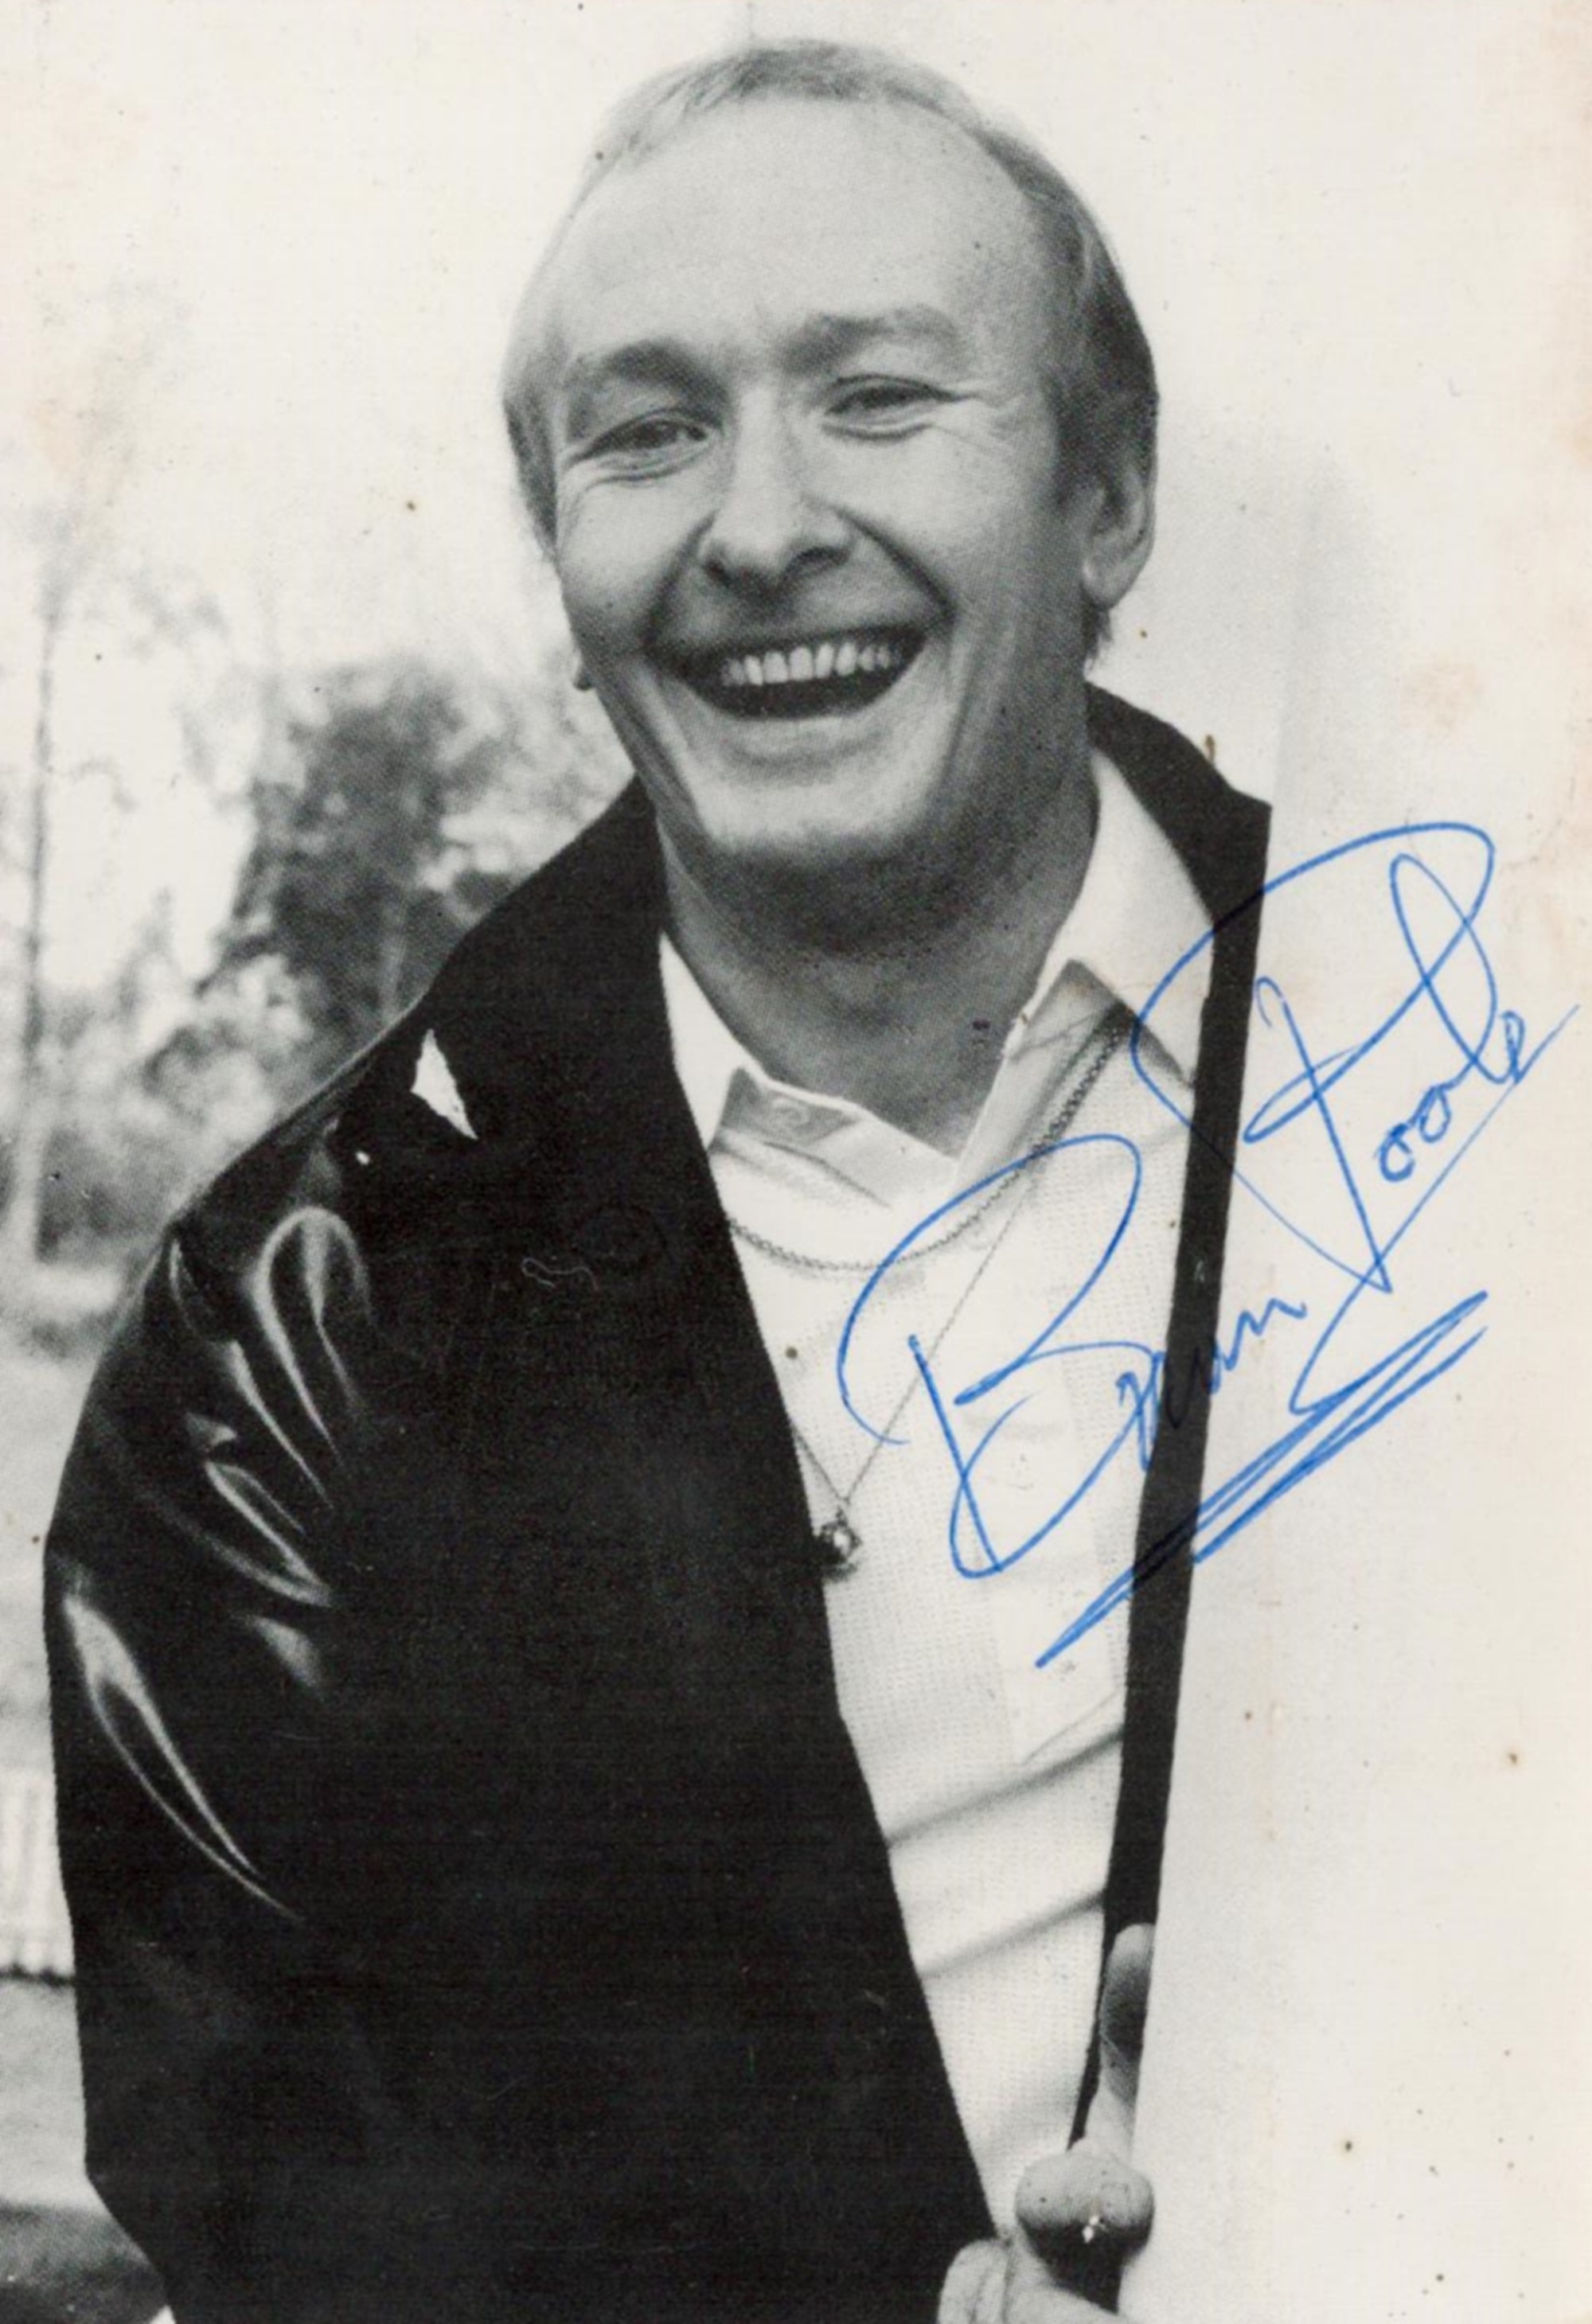 Brian Poole signed 6x4 black and white photo. Poole is a singer and performer who was the lead